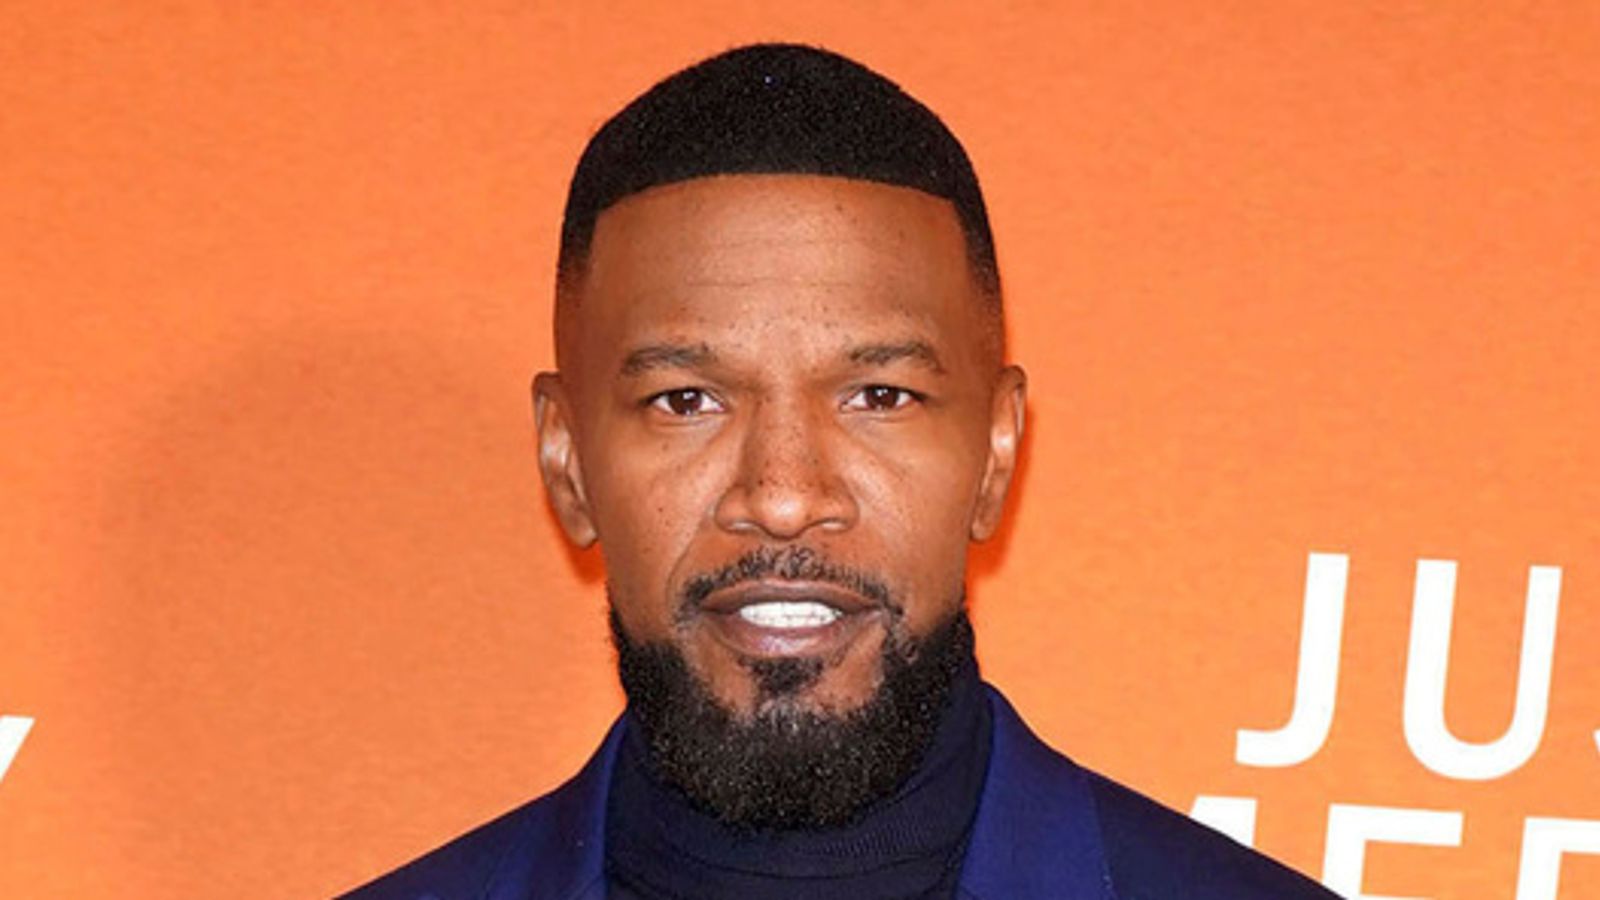 Jamie Foxx recovering after 'medical complication', family says 